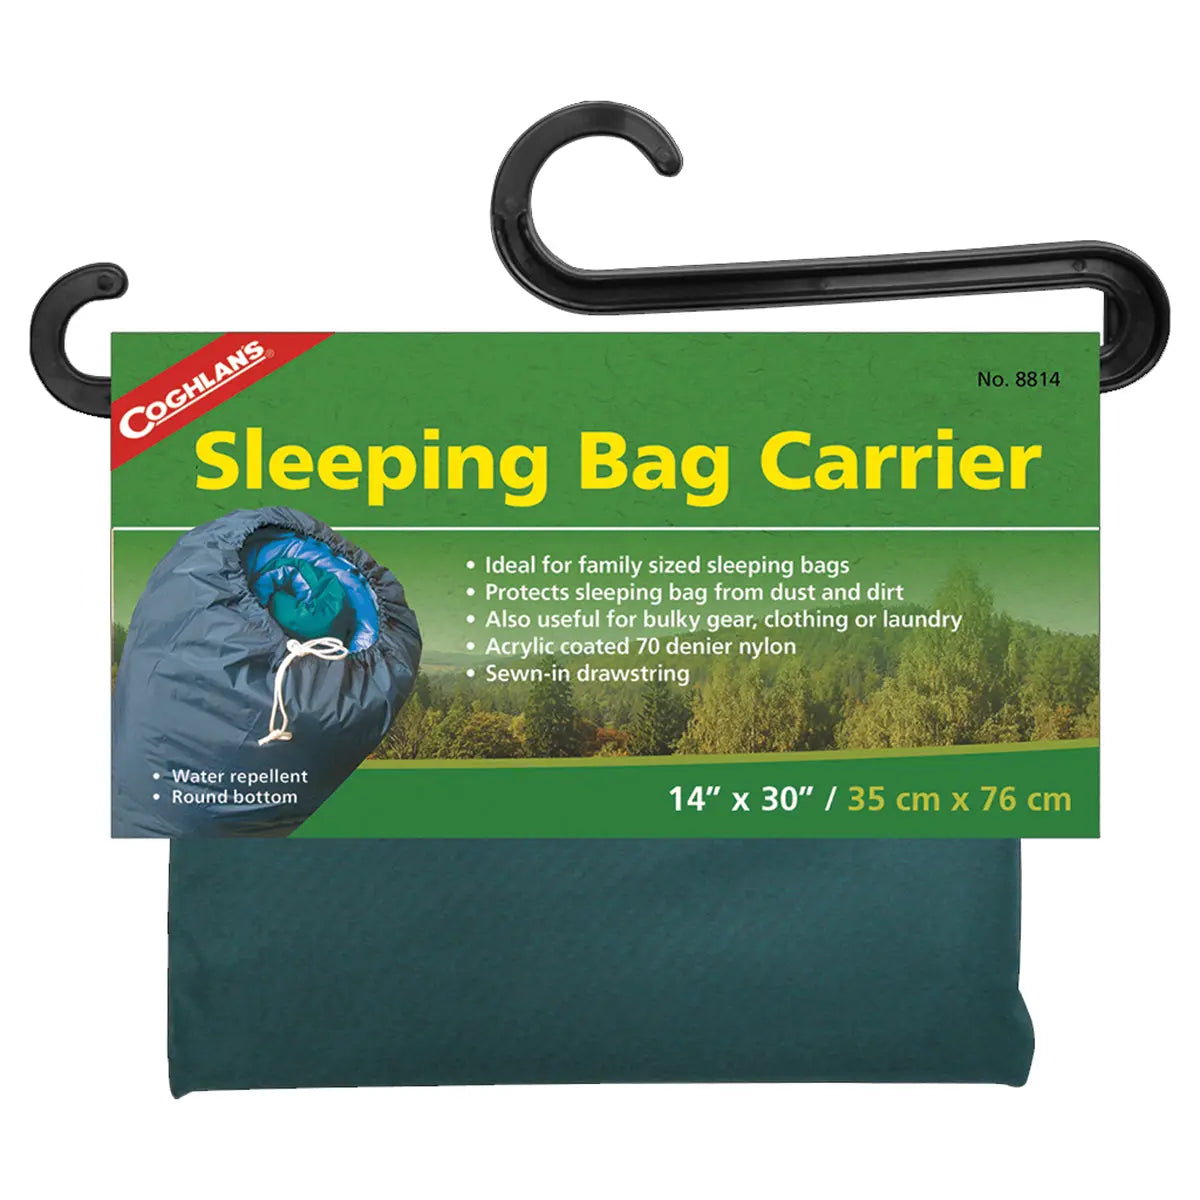 Coghlan's Sleeping Bag Carrier, Water Repellent, Useful for Clothing & Laundry Coghlan's